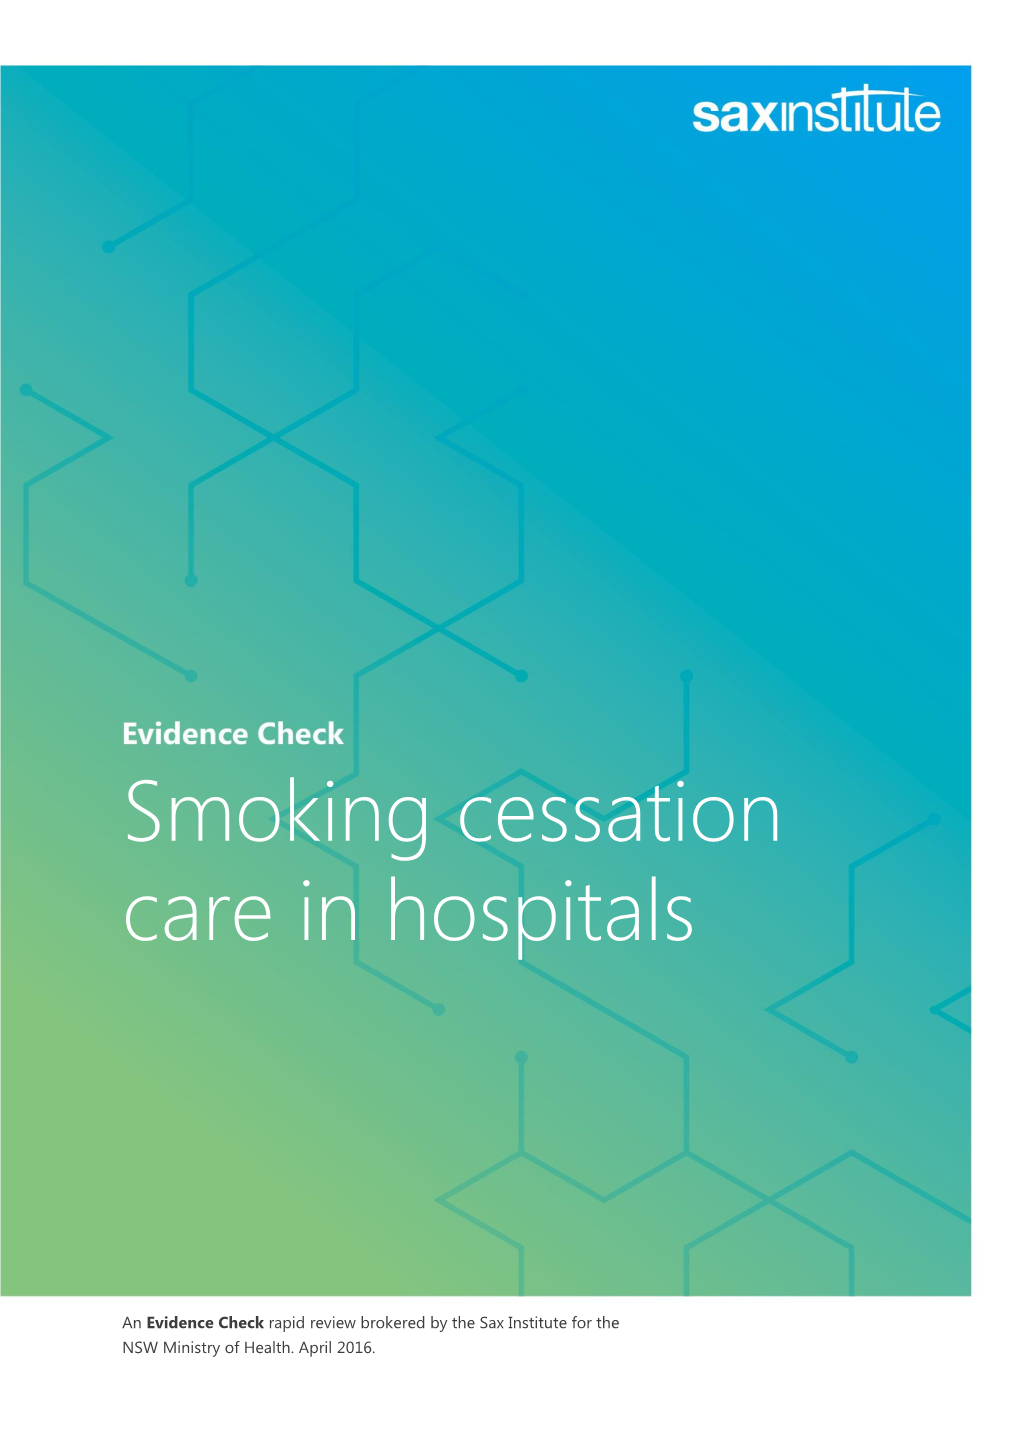 Implementing Nicotine Dependence and Smoking Cessation Care